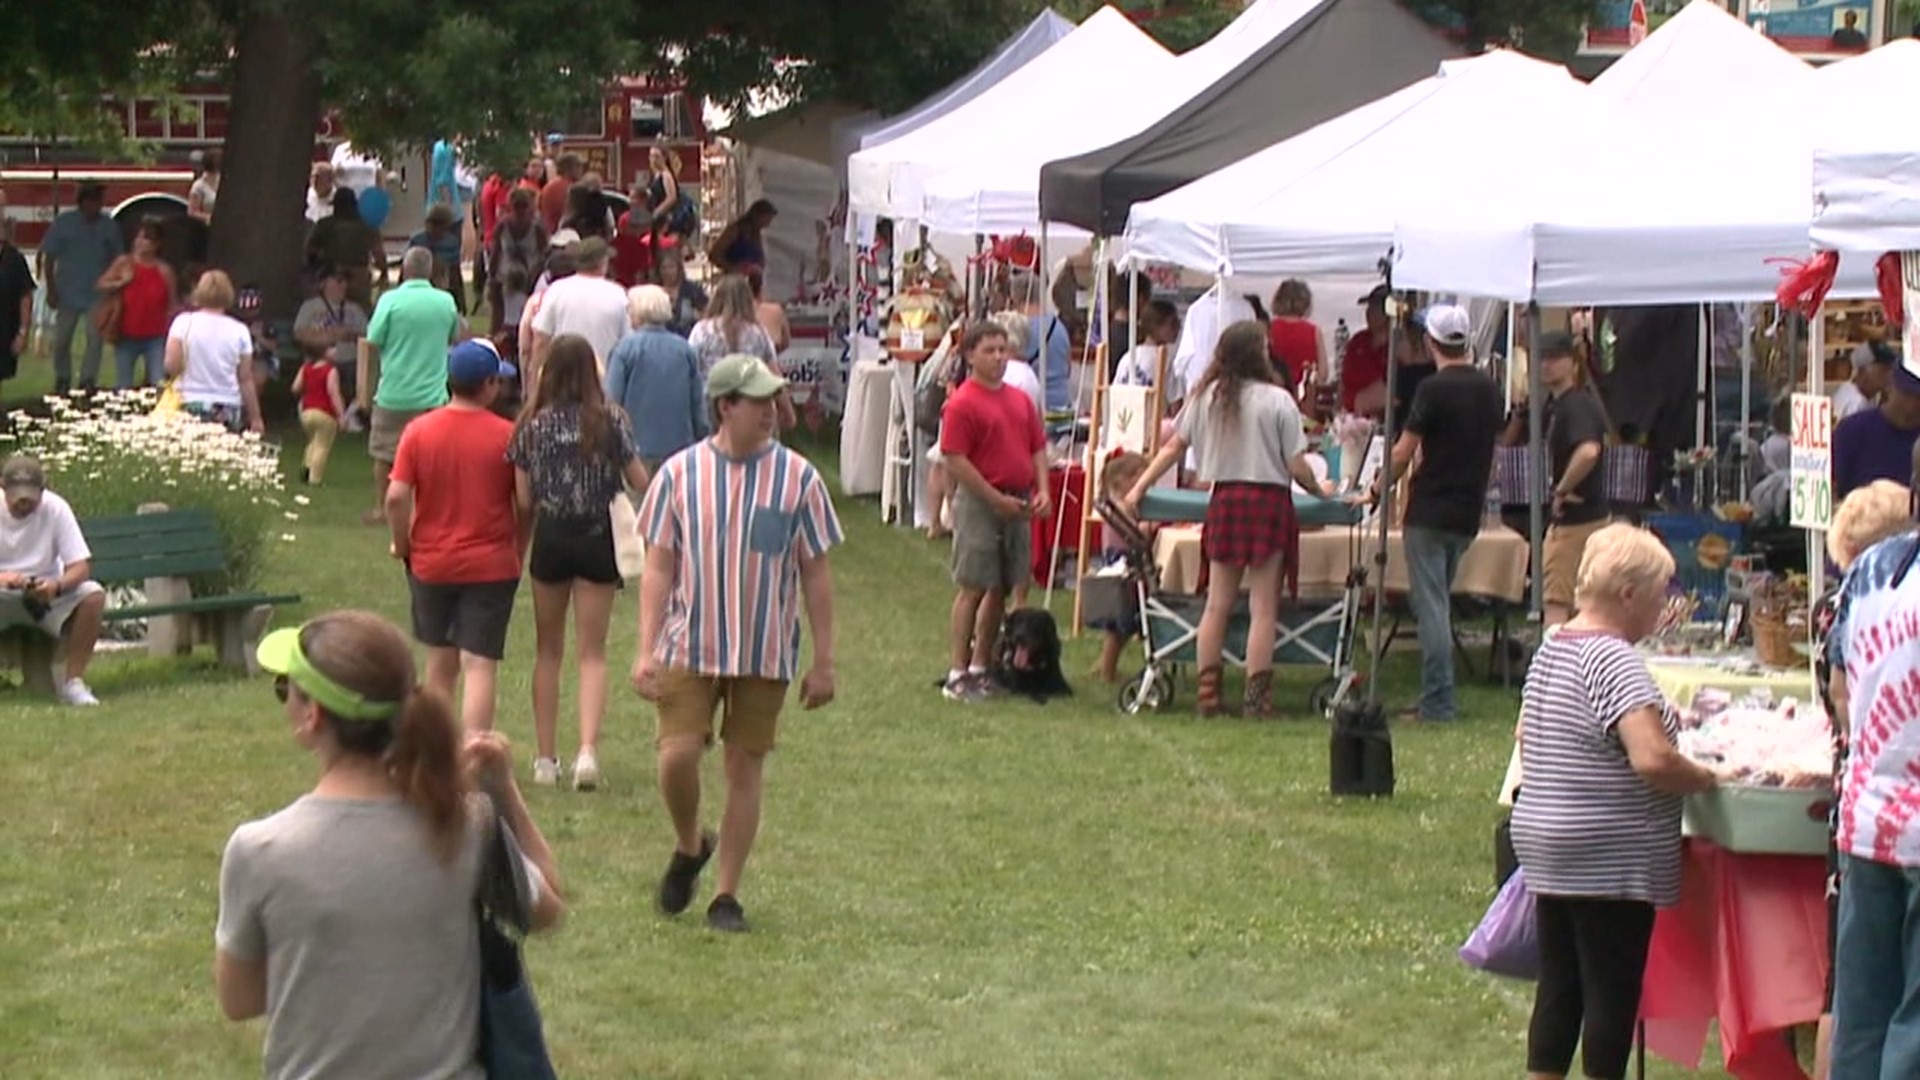 Montrose held it's annual 4th of July Celebration complete with parade and vendor fair.